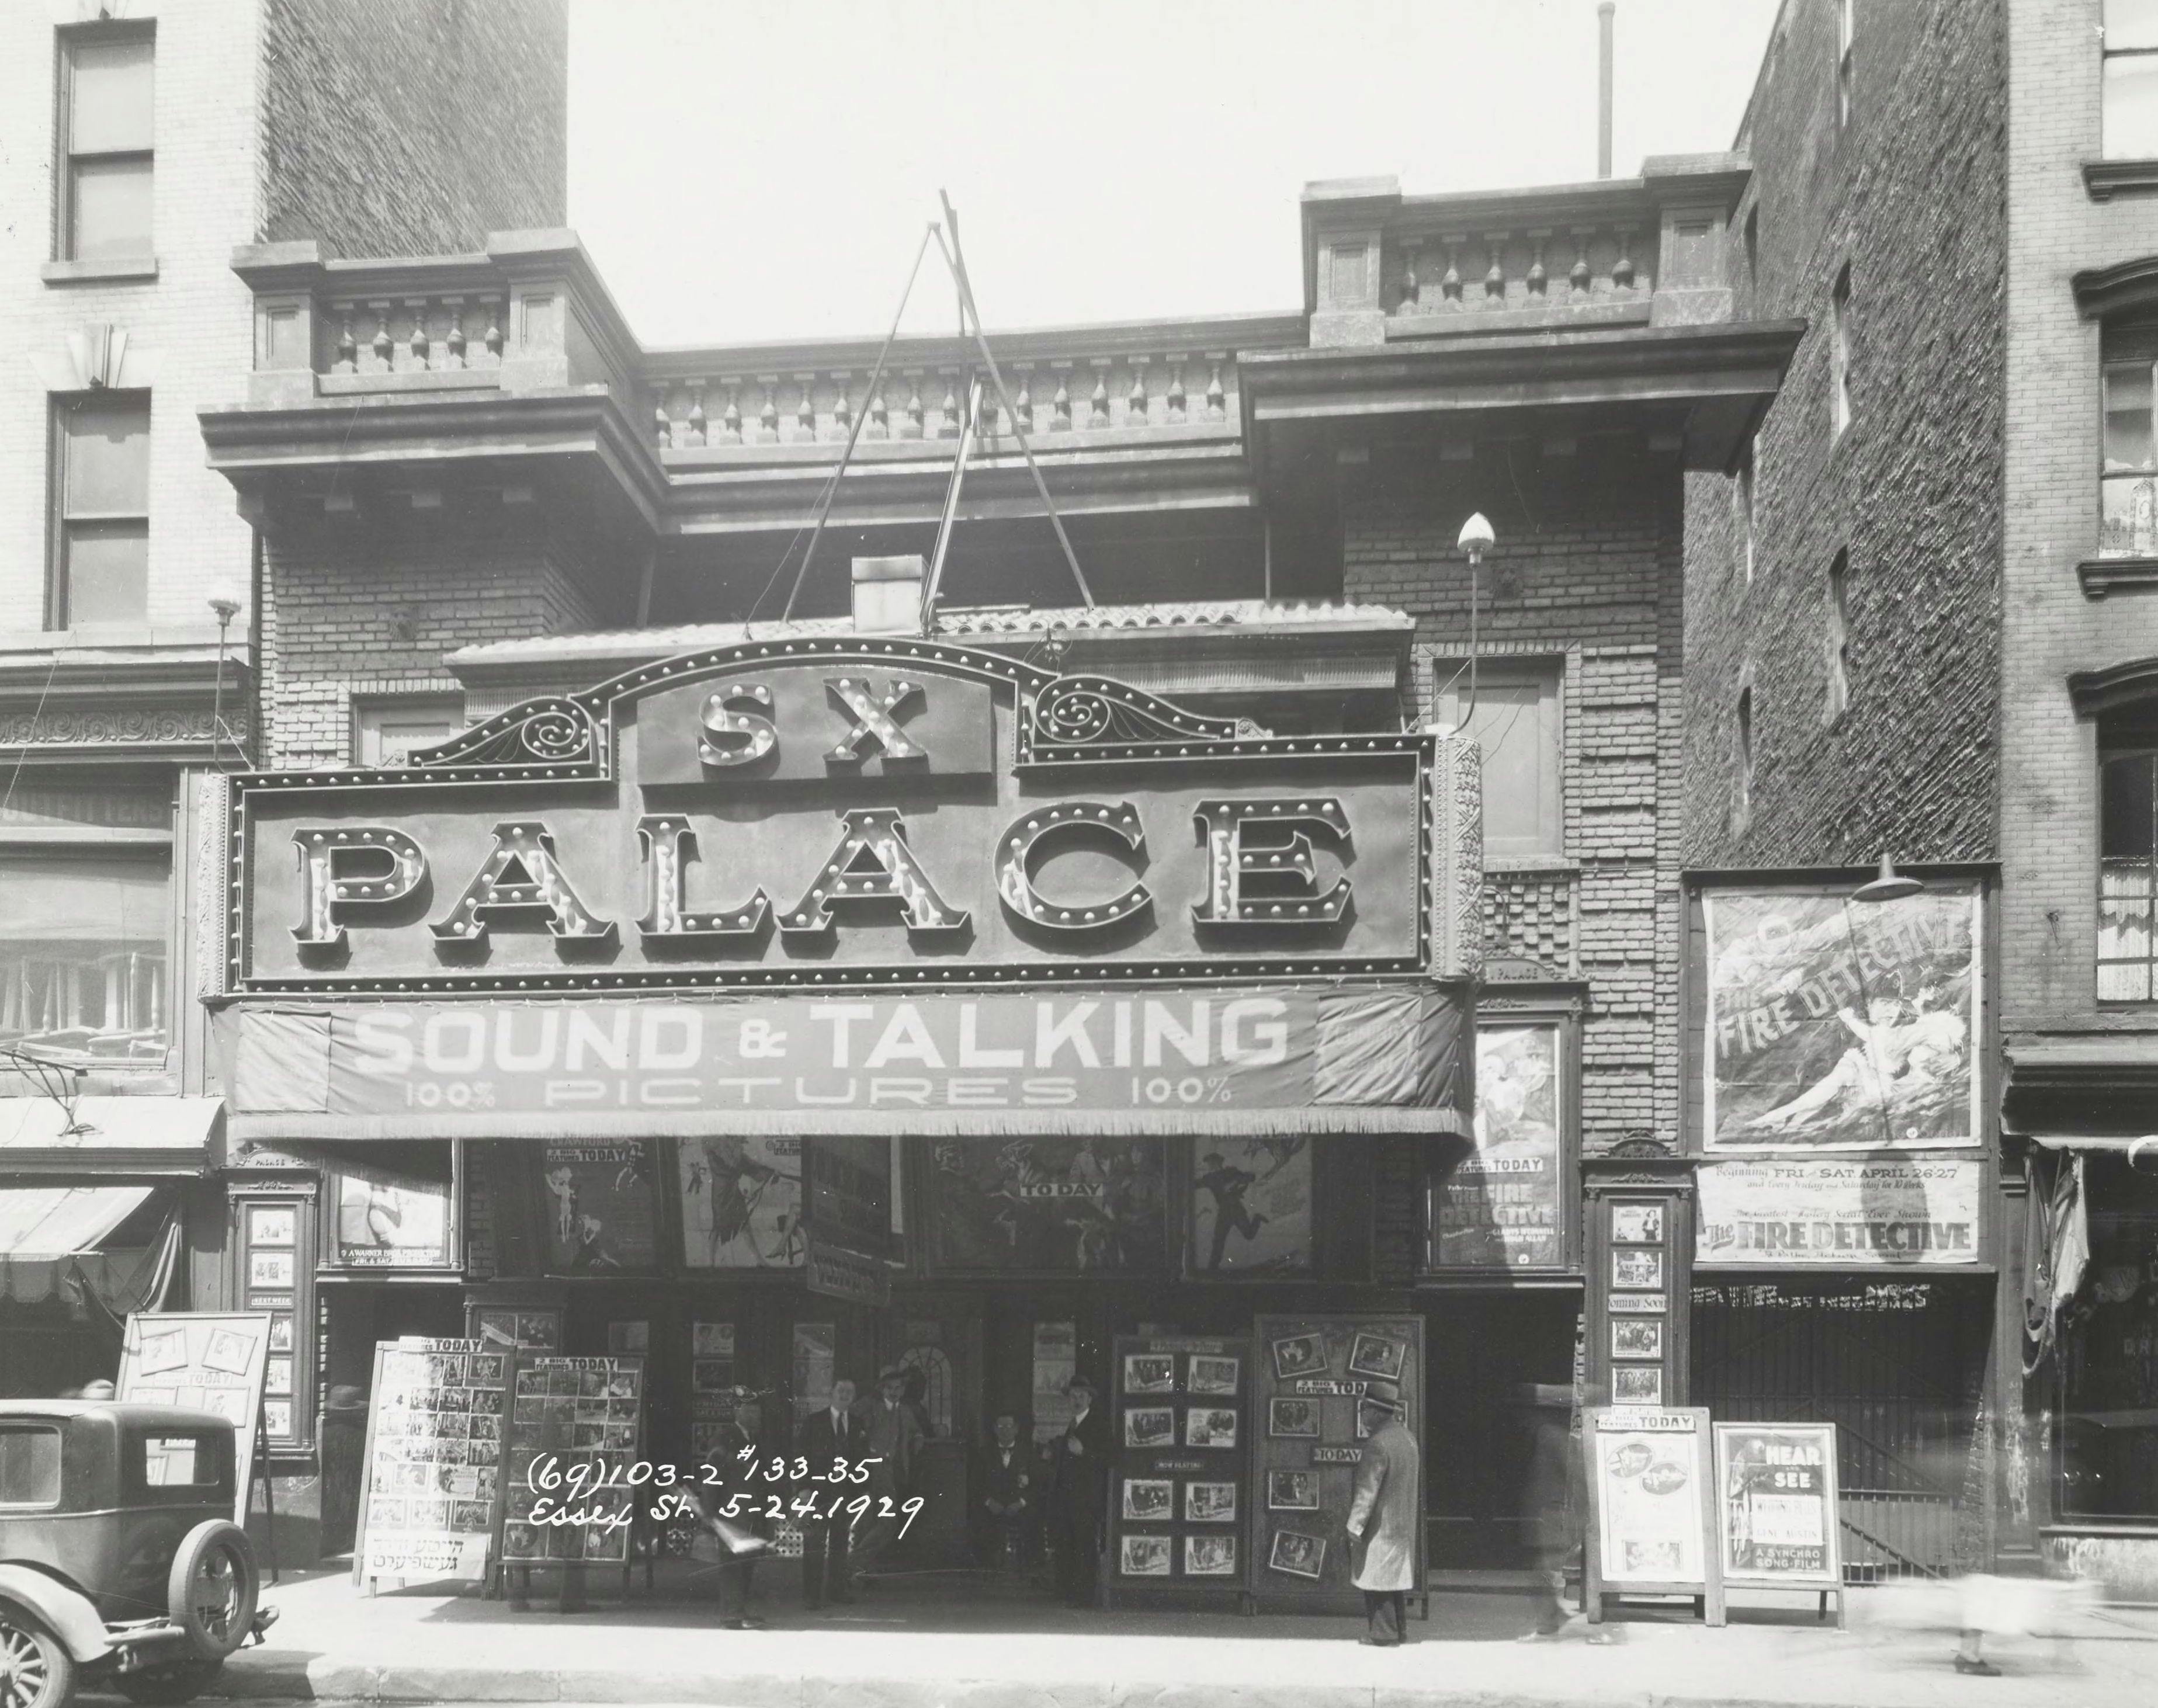 A movie theater advertising sound and talking pictures on Essex St. in Manhattan in 1929